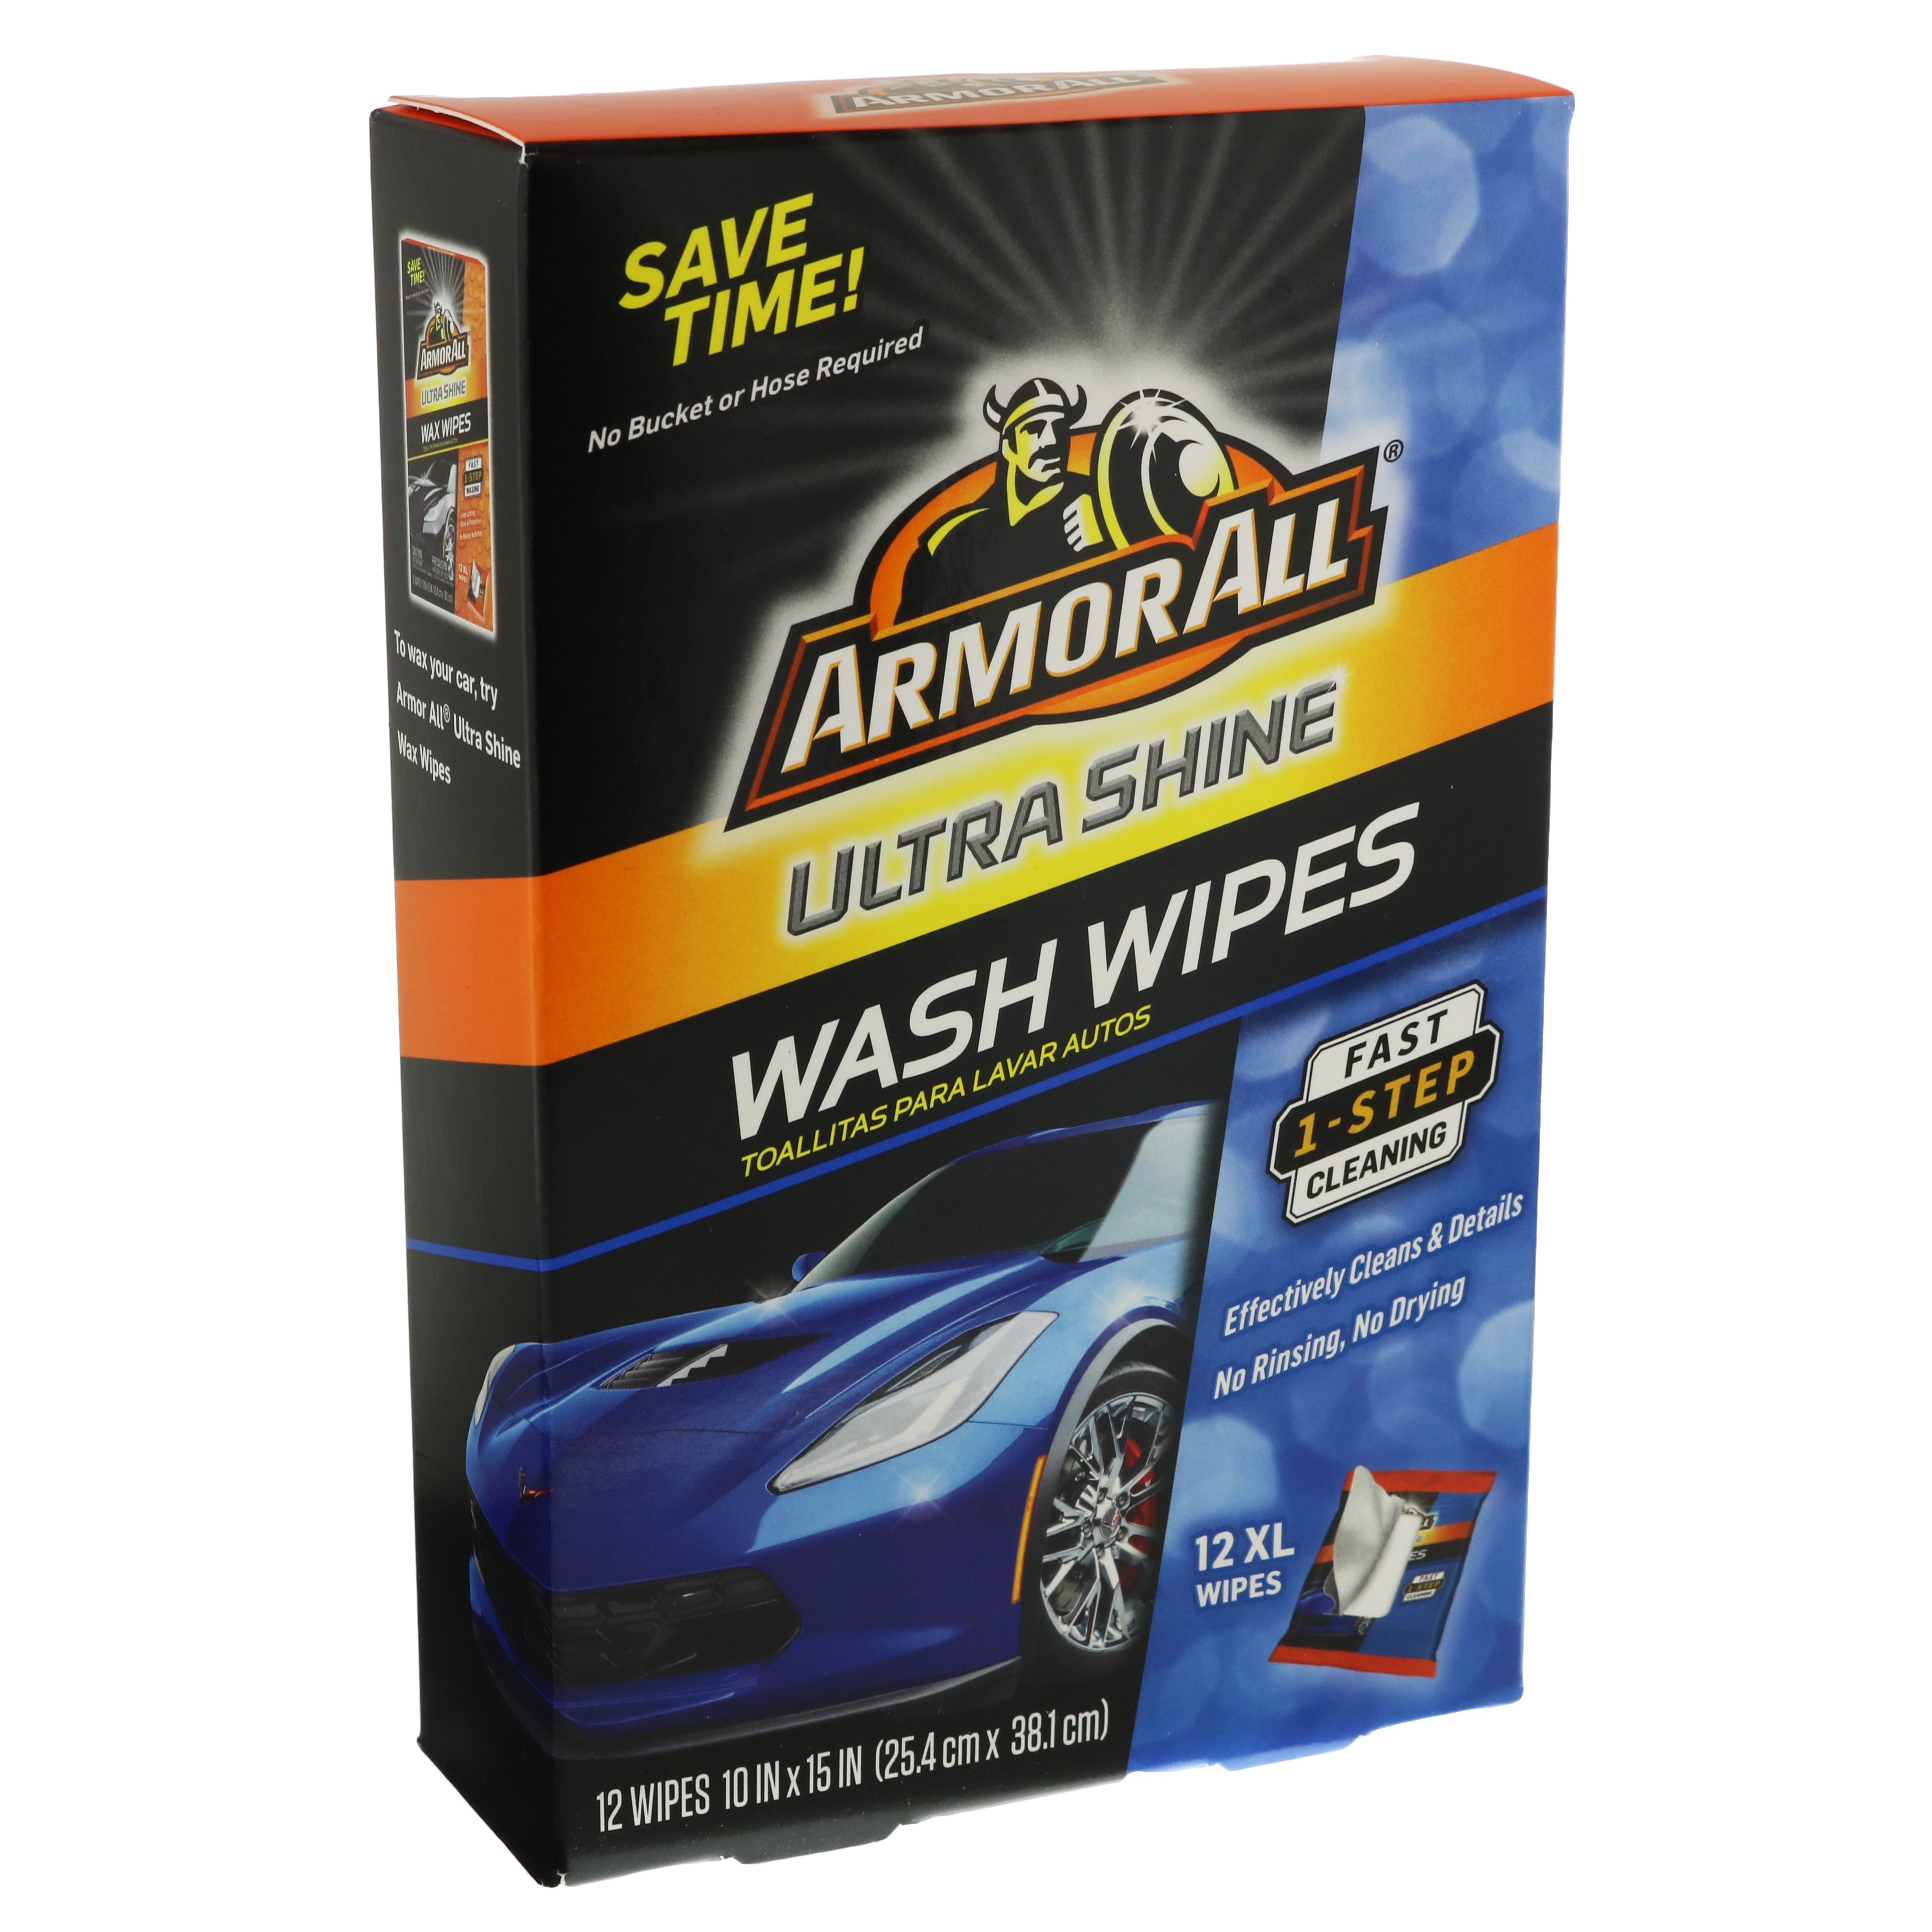 Armor All Cleaning Wipes - Shop Automotive Cleaners at H-E-B